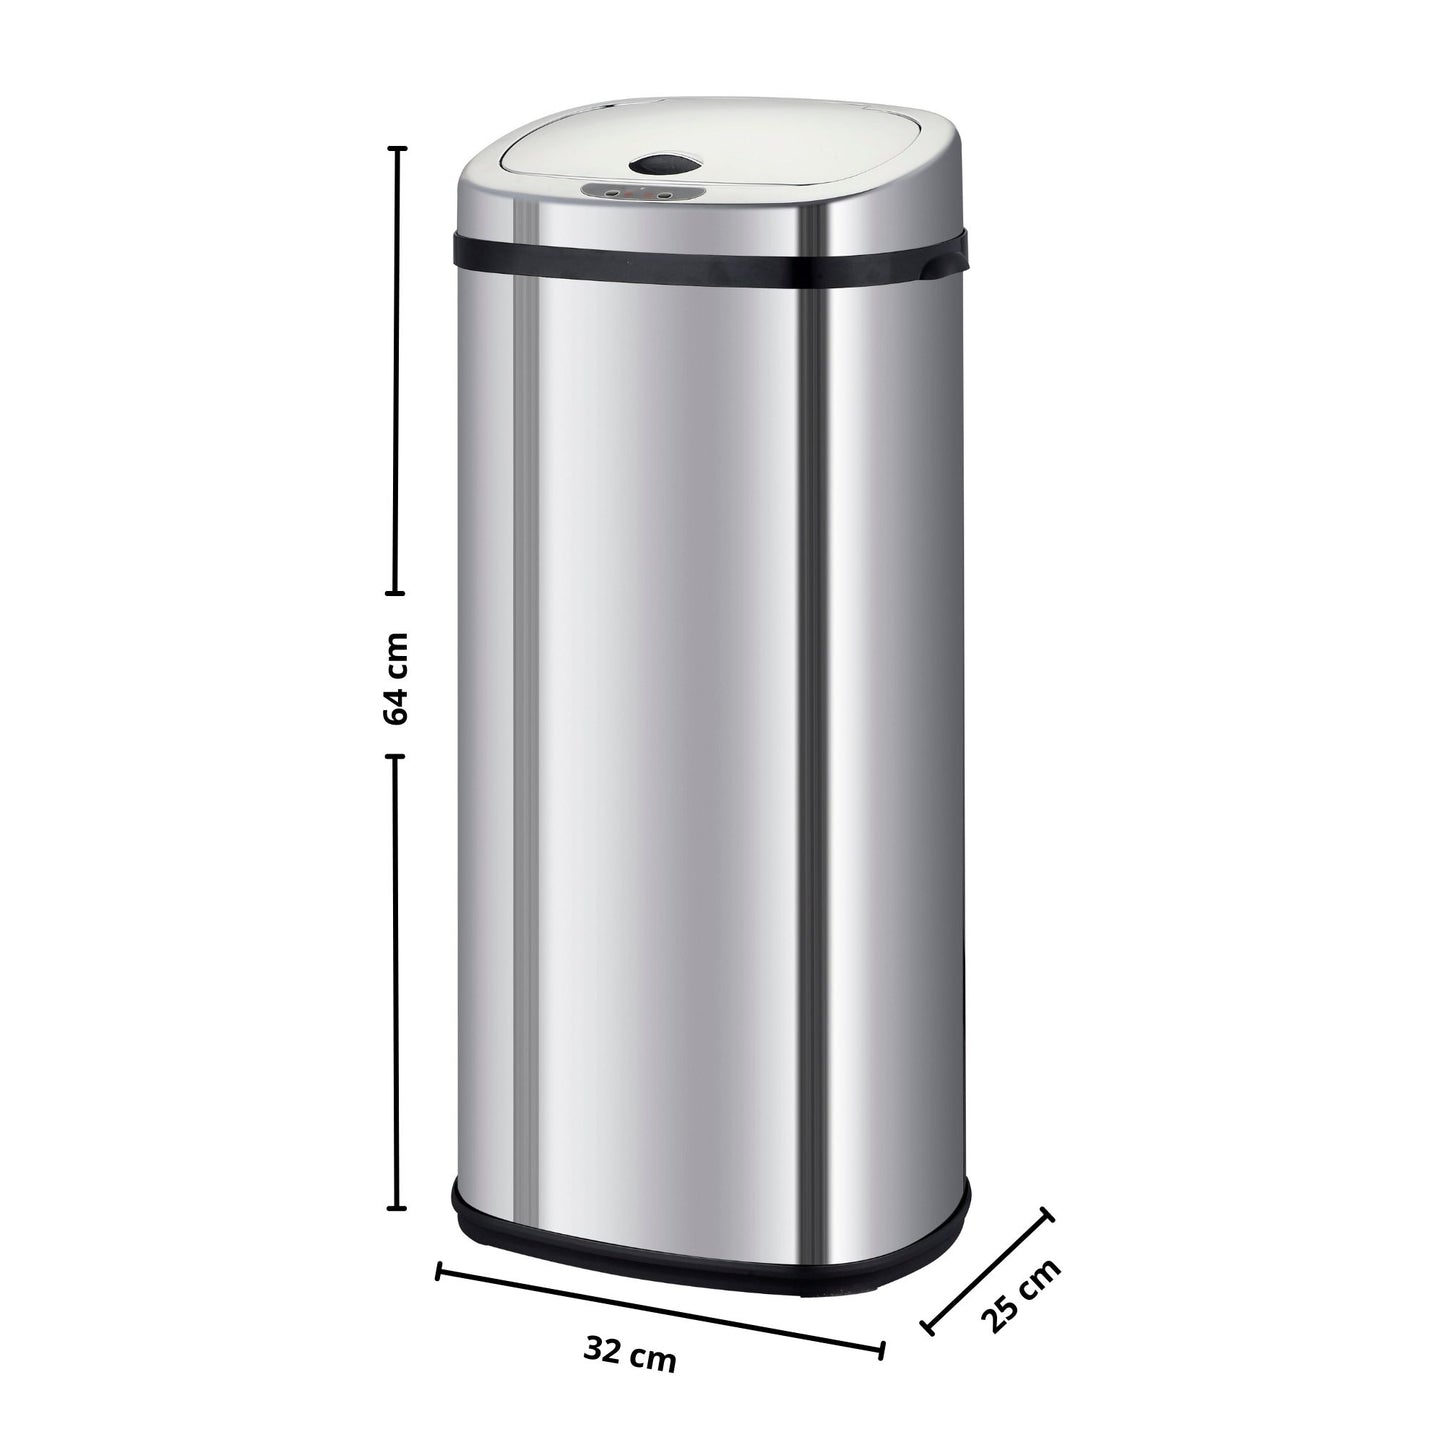 Automatic kitchen bin 42L LARGO in stainless steel with strapping